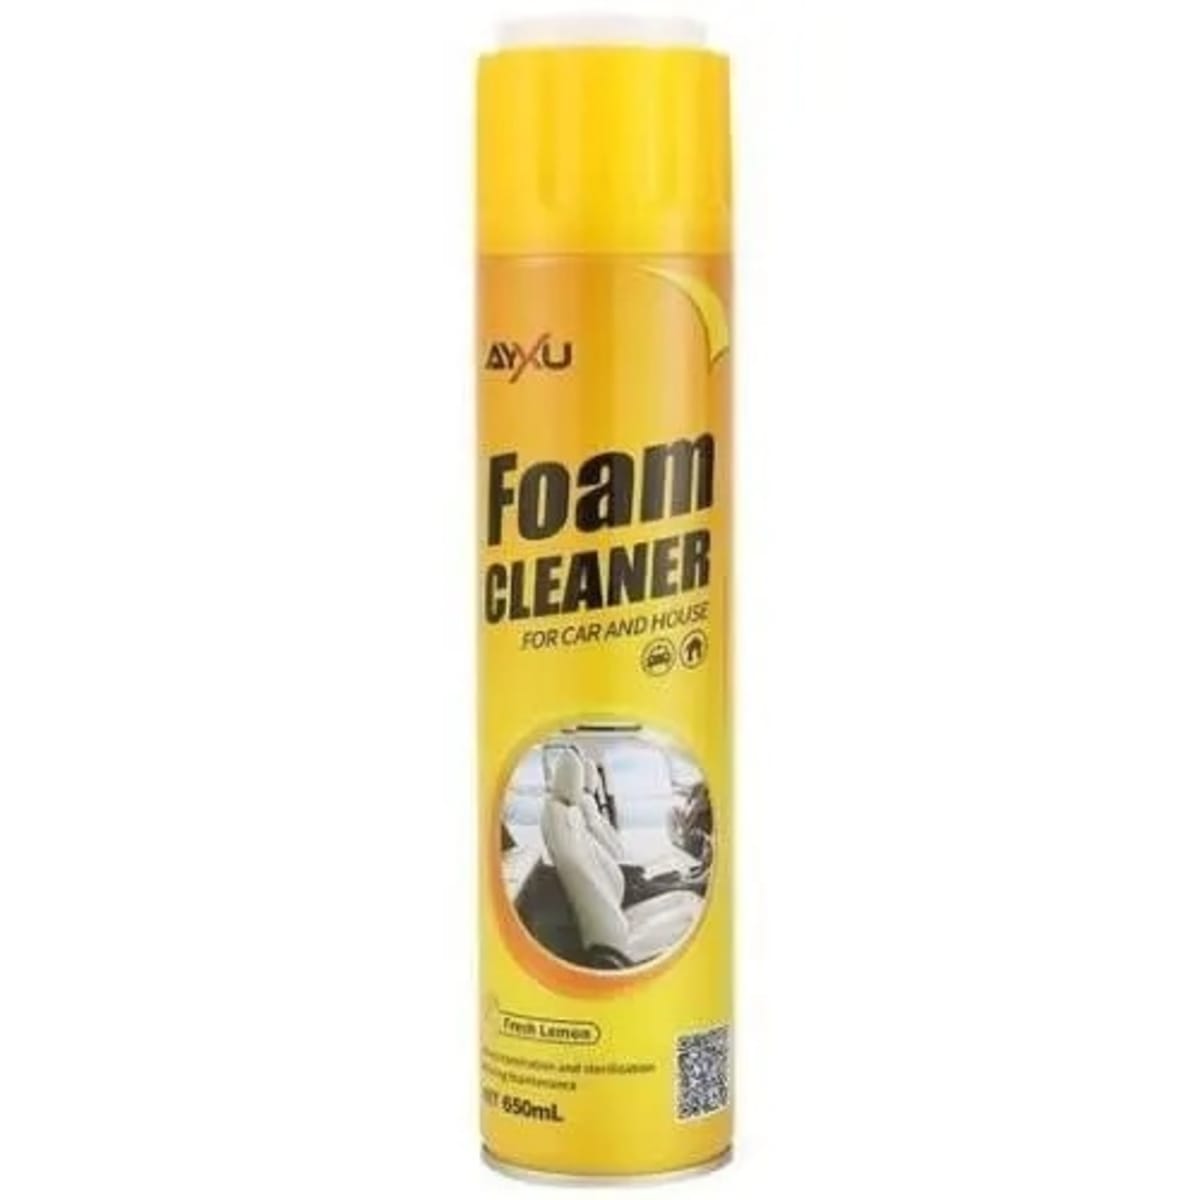 Multipurpose Foam Cleaner Spray,Foam Cleaner, Foam Cleaner for Car and  House Lemon Flavor, Strong Decontamination Cleaners Spray for Kitchen and  Car (200ml) 